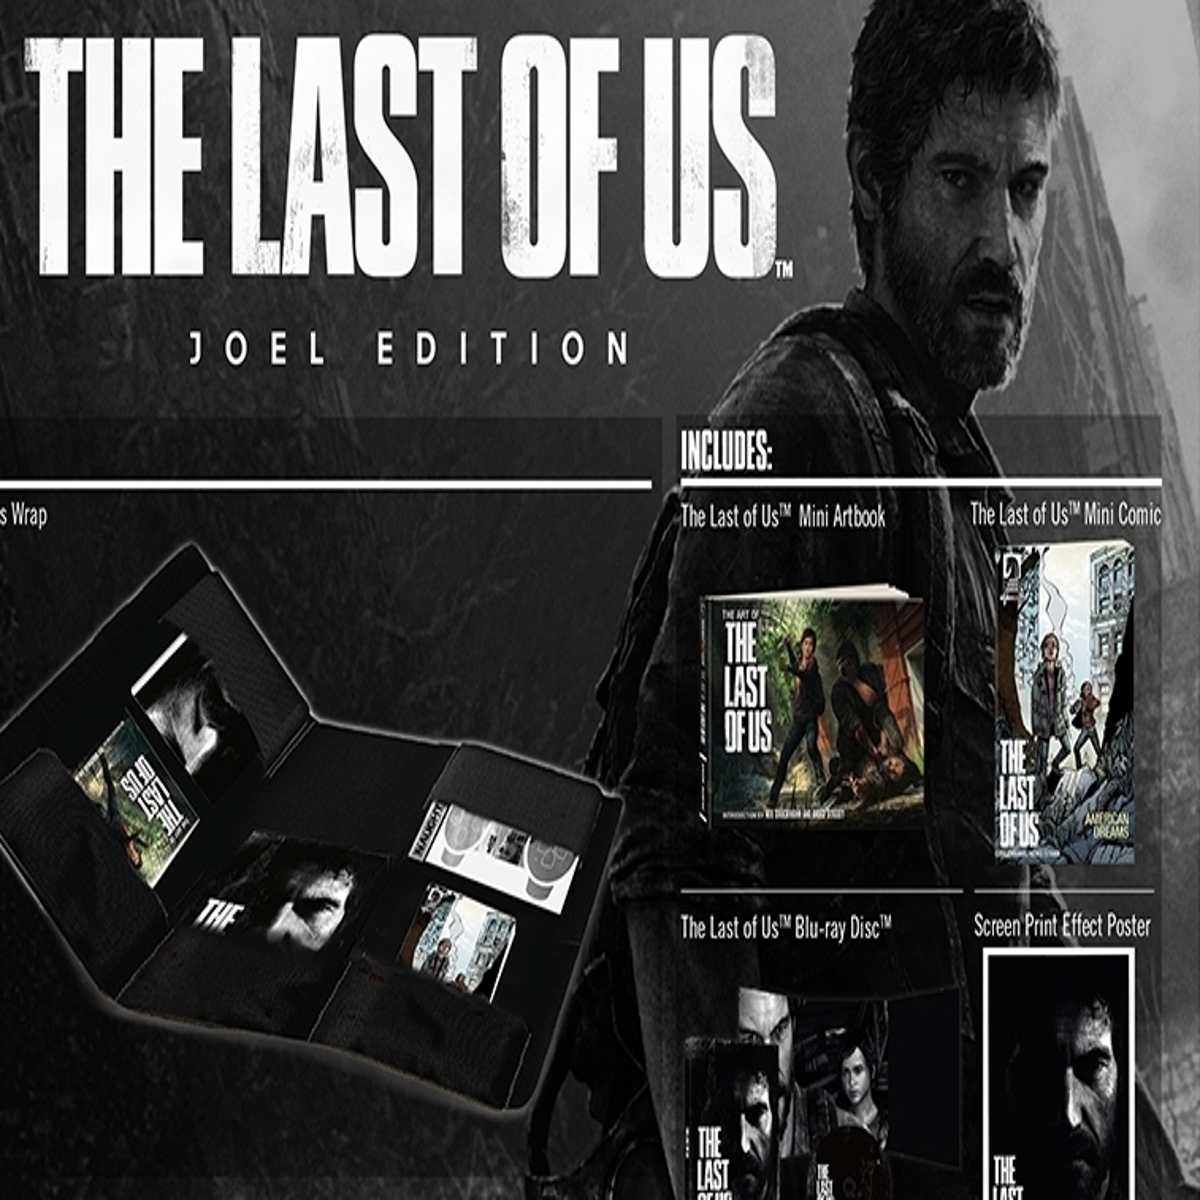 The Last of Us Joel & Ellie statue brings PS3 cover to life